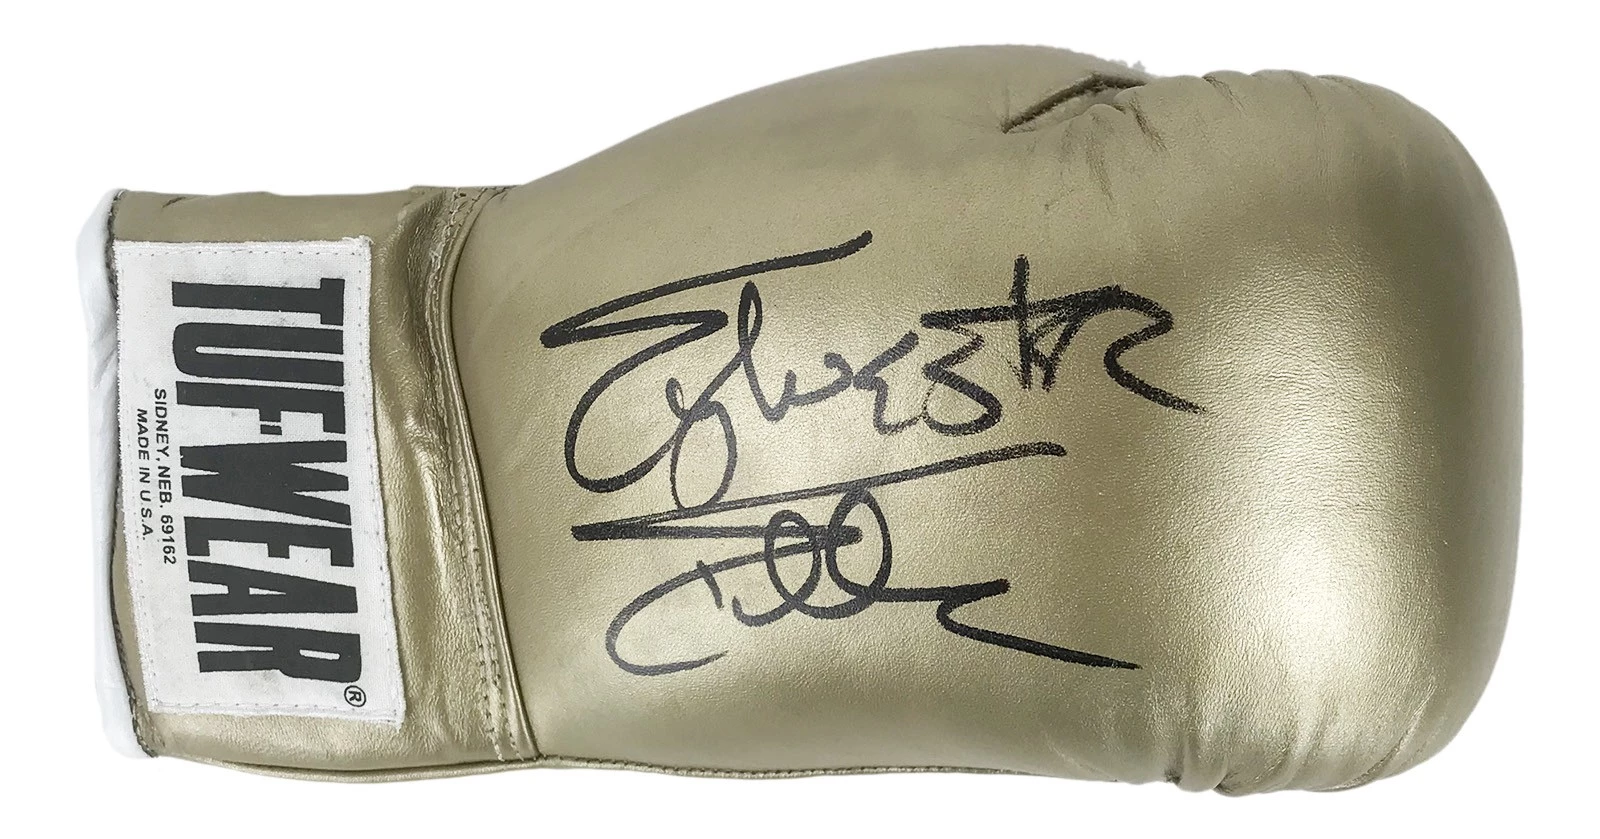 Autographed Sylvester Stallone Boxing Glove